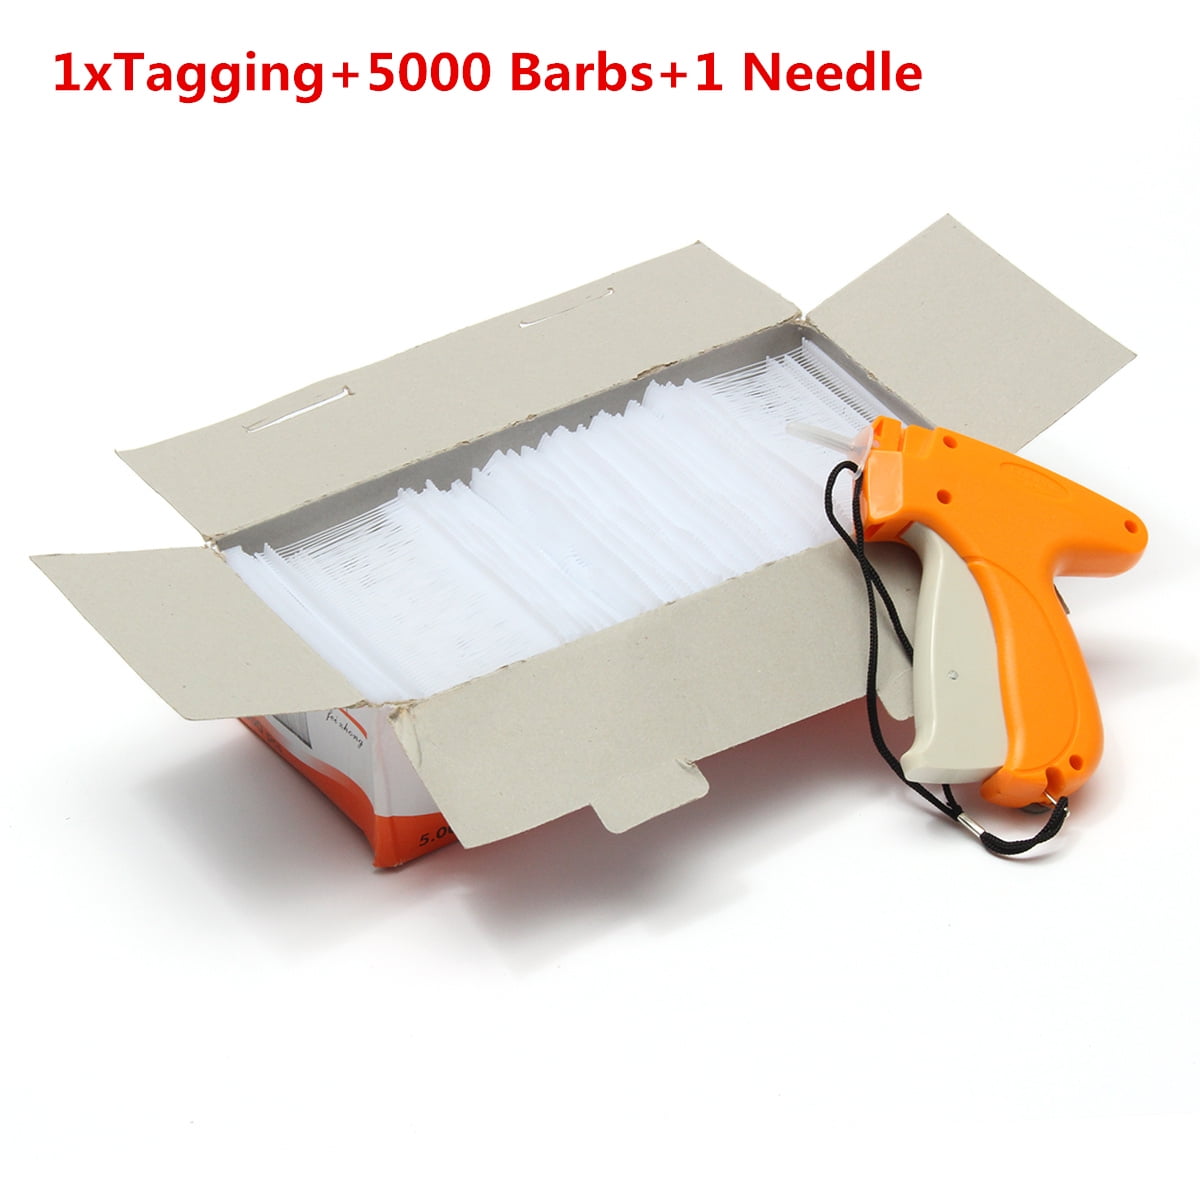 5000 Green 1" Clothing Garment Price Label Tagging Tagger Gun Barbs Fasterners 